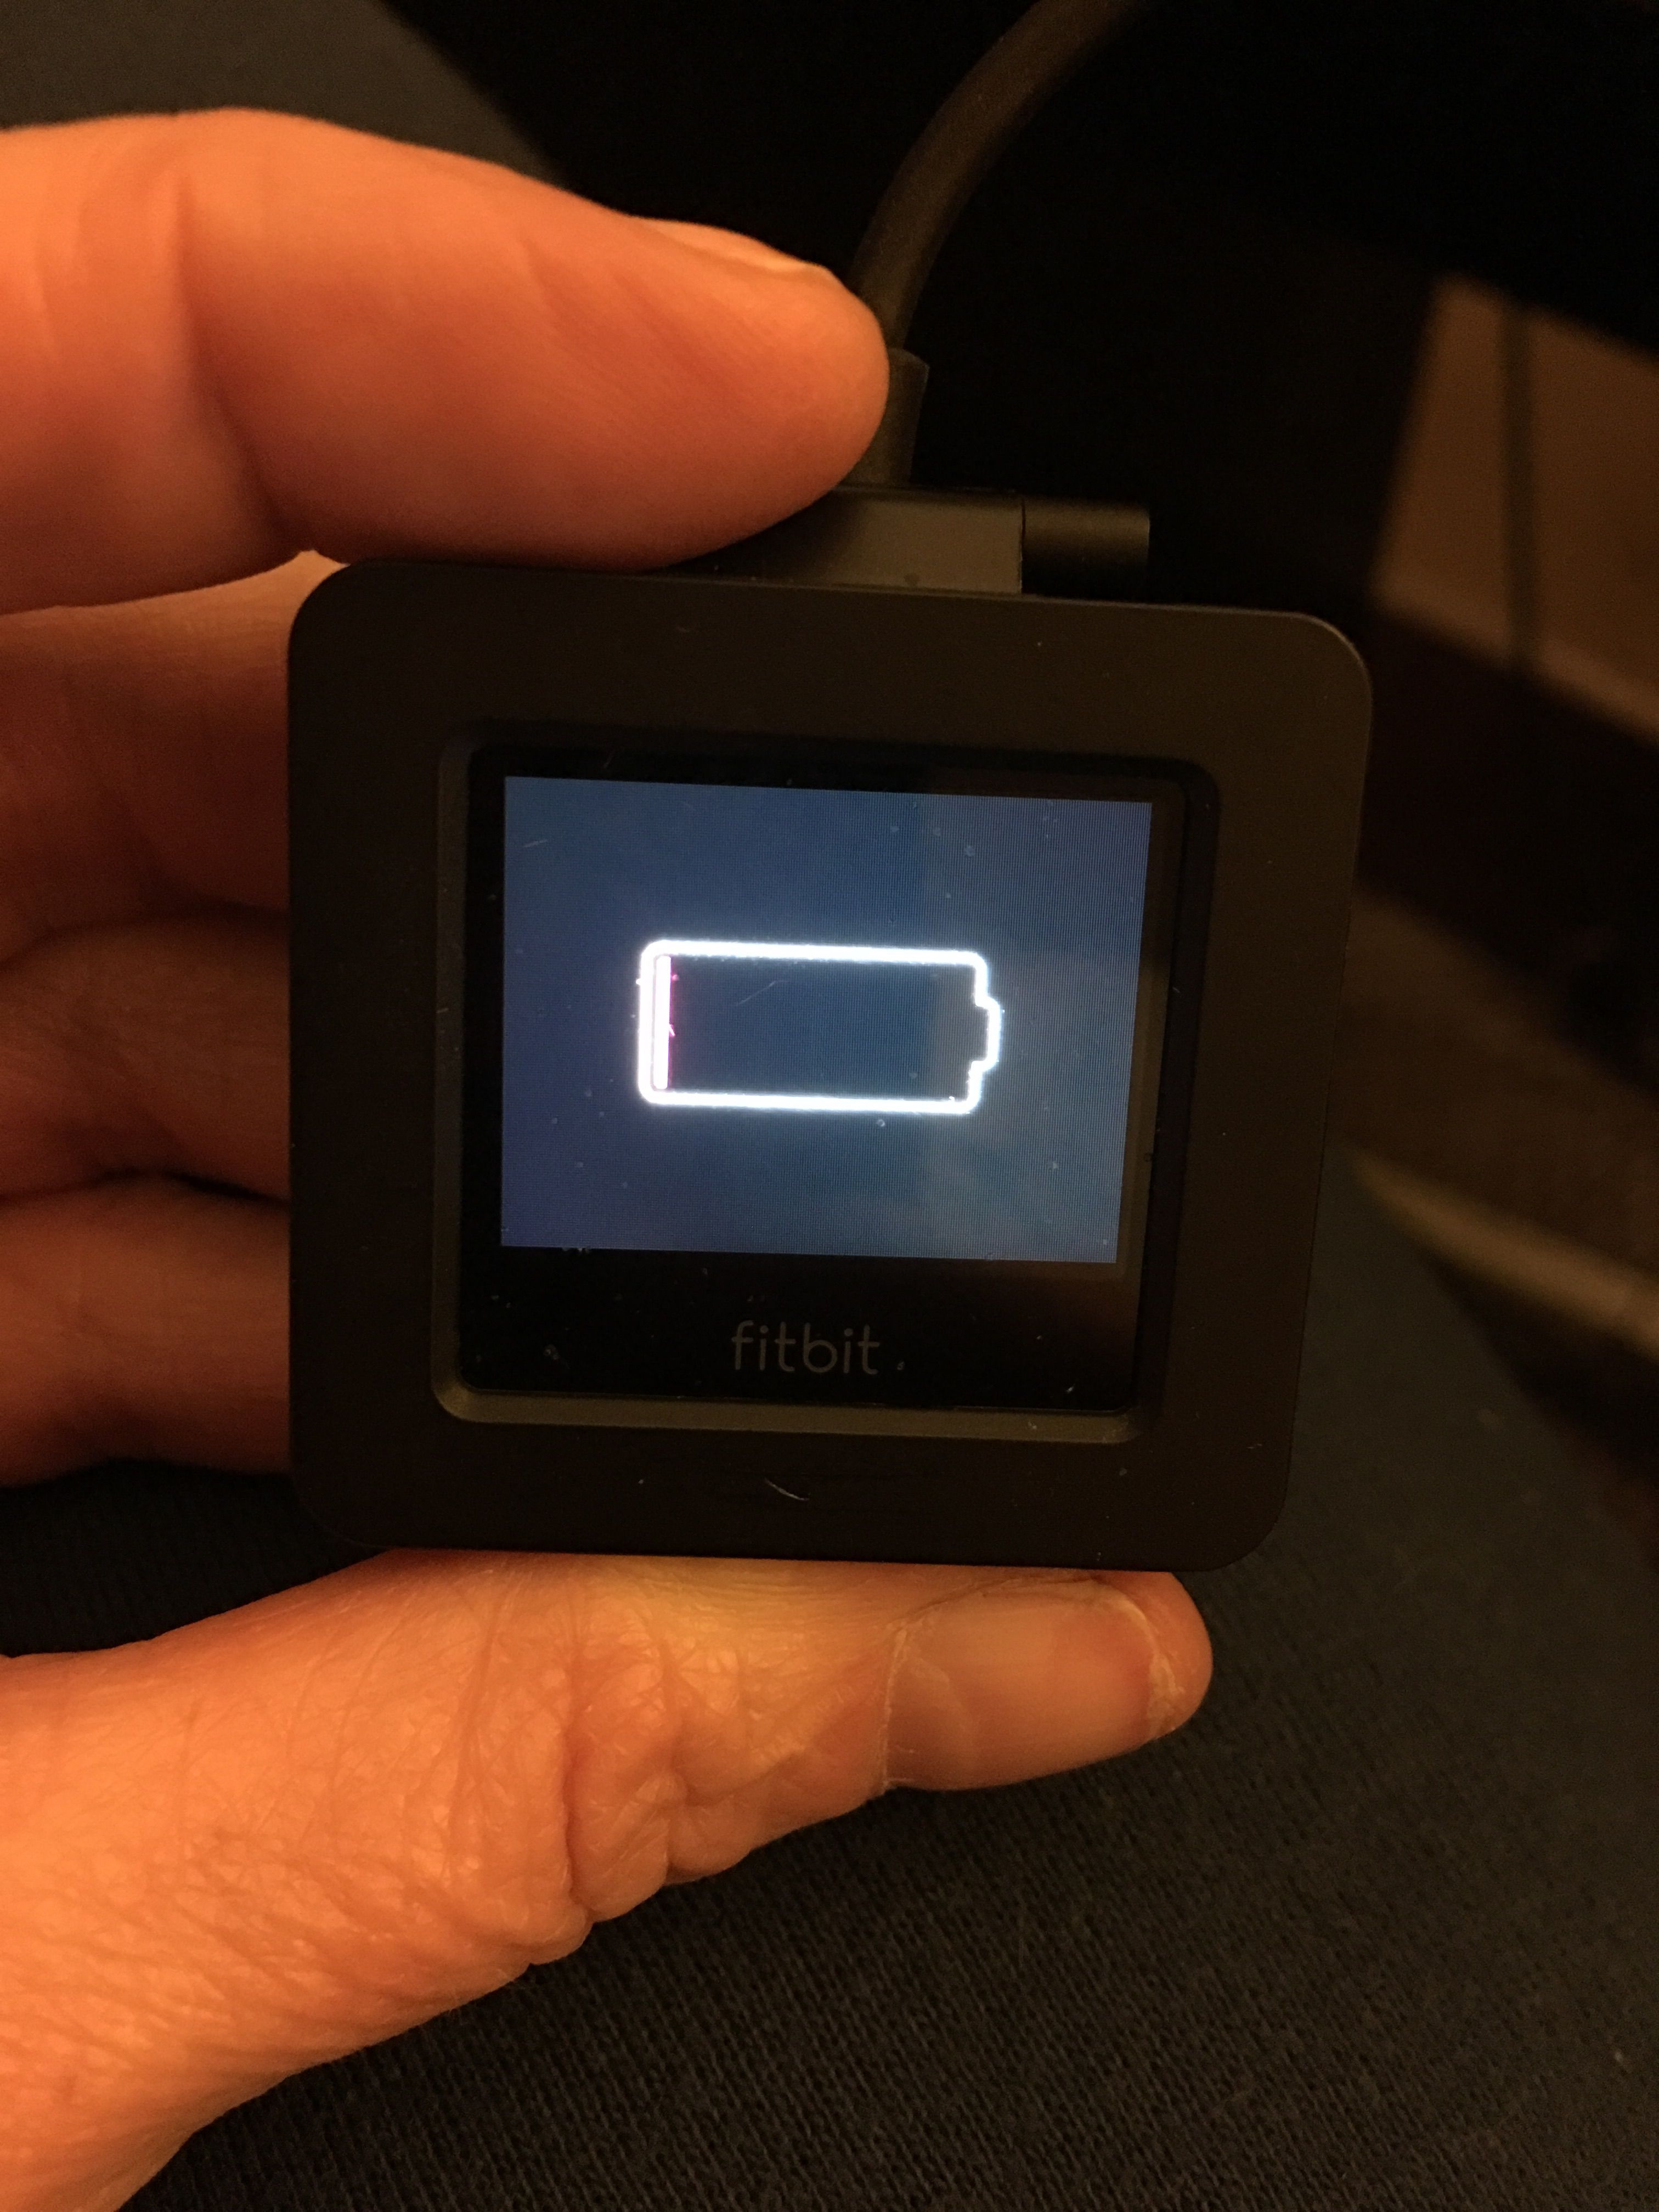 fitbit blaze died and wont charge